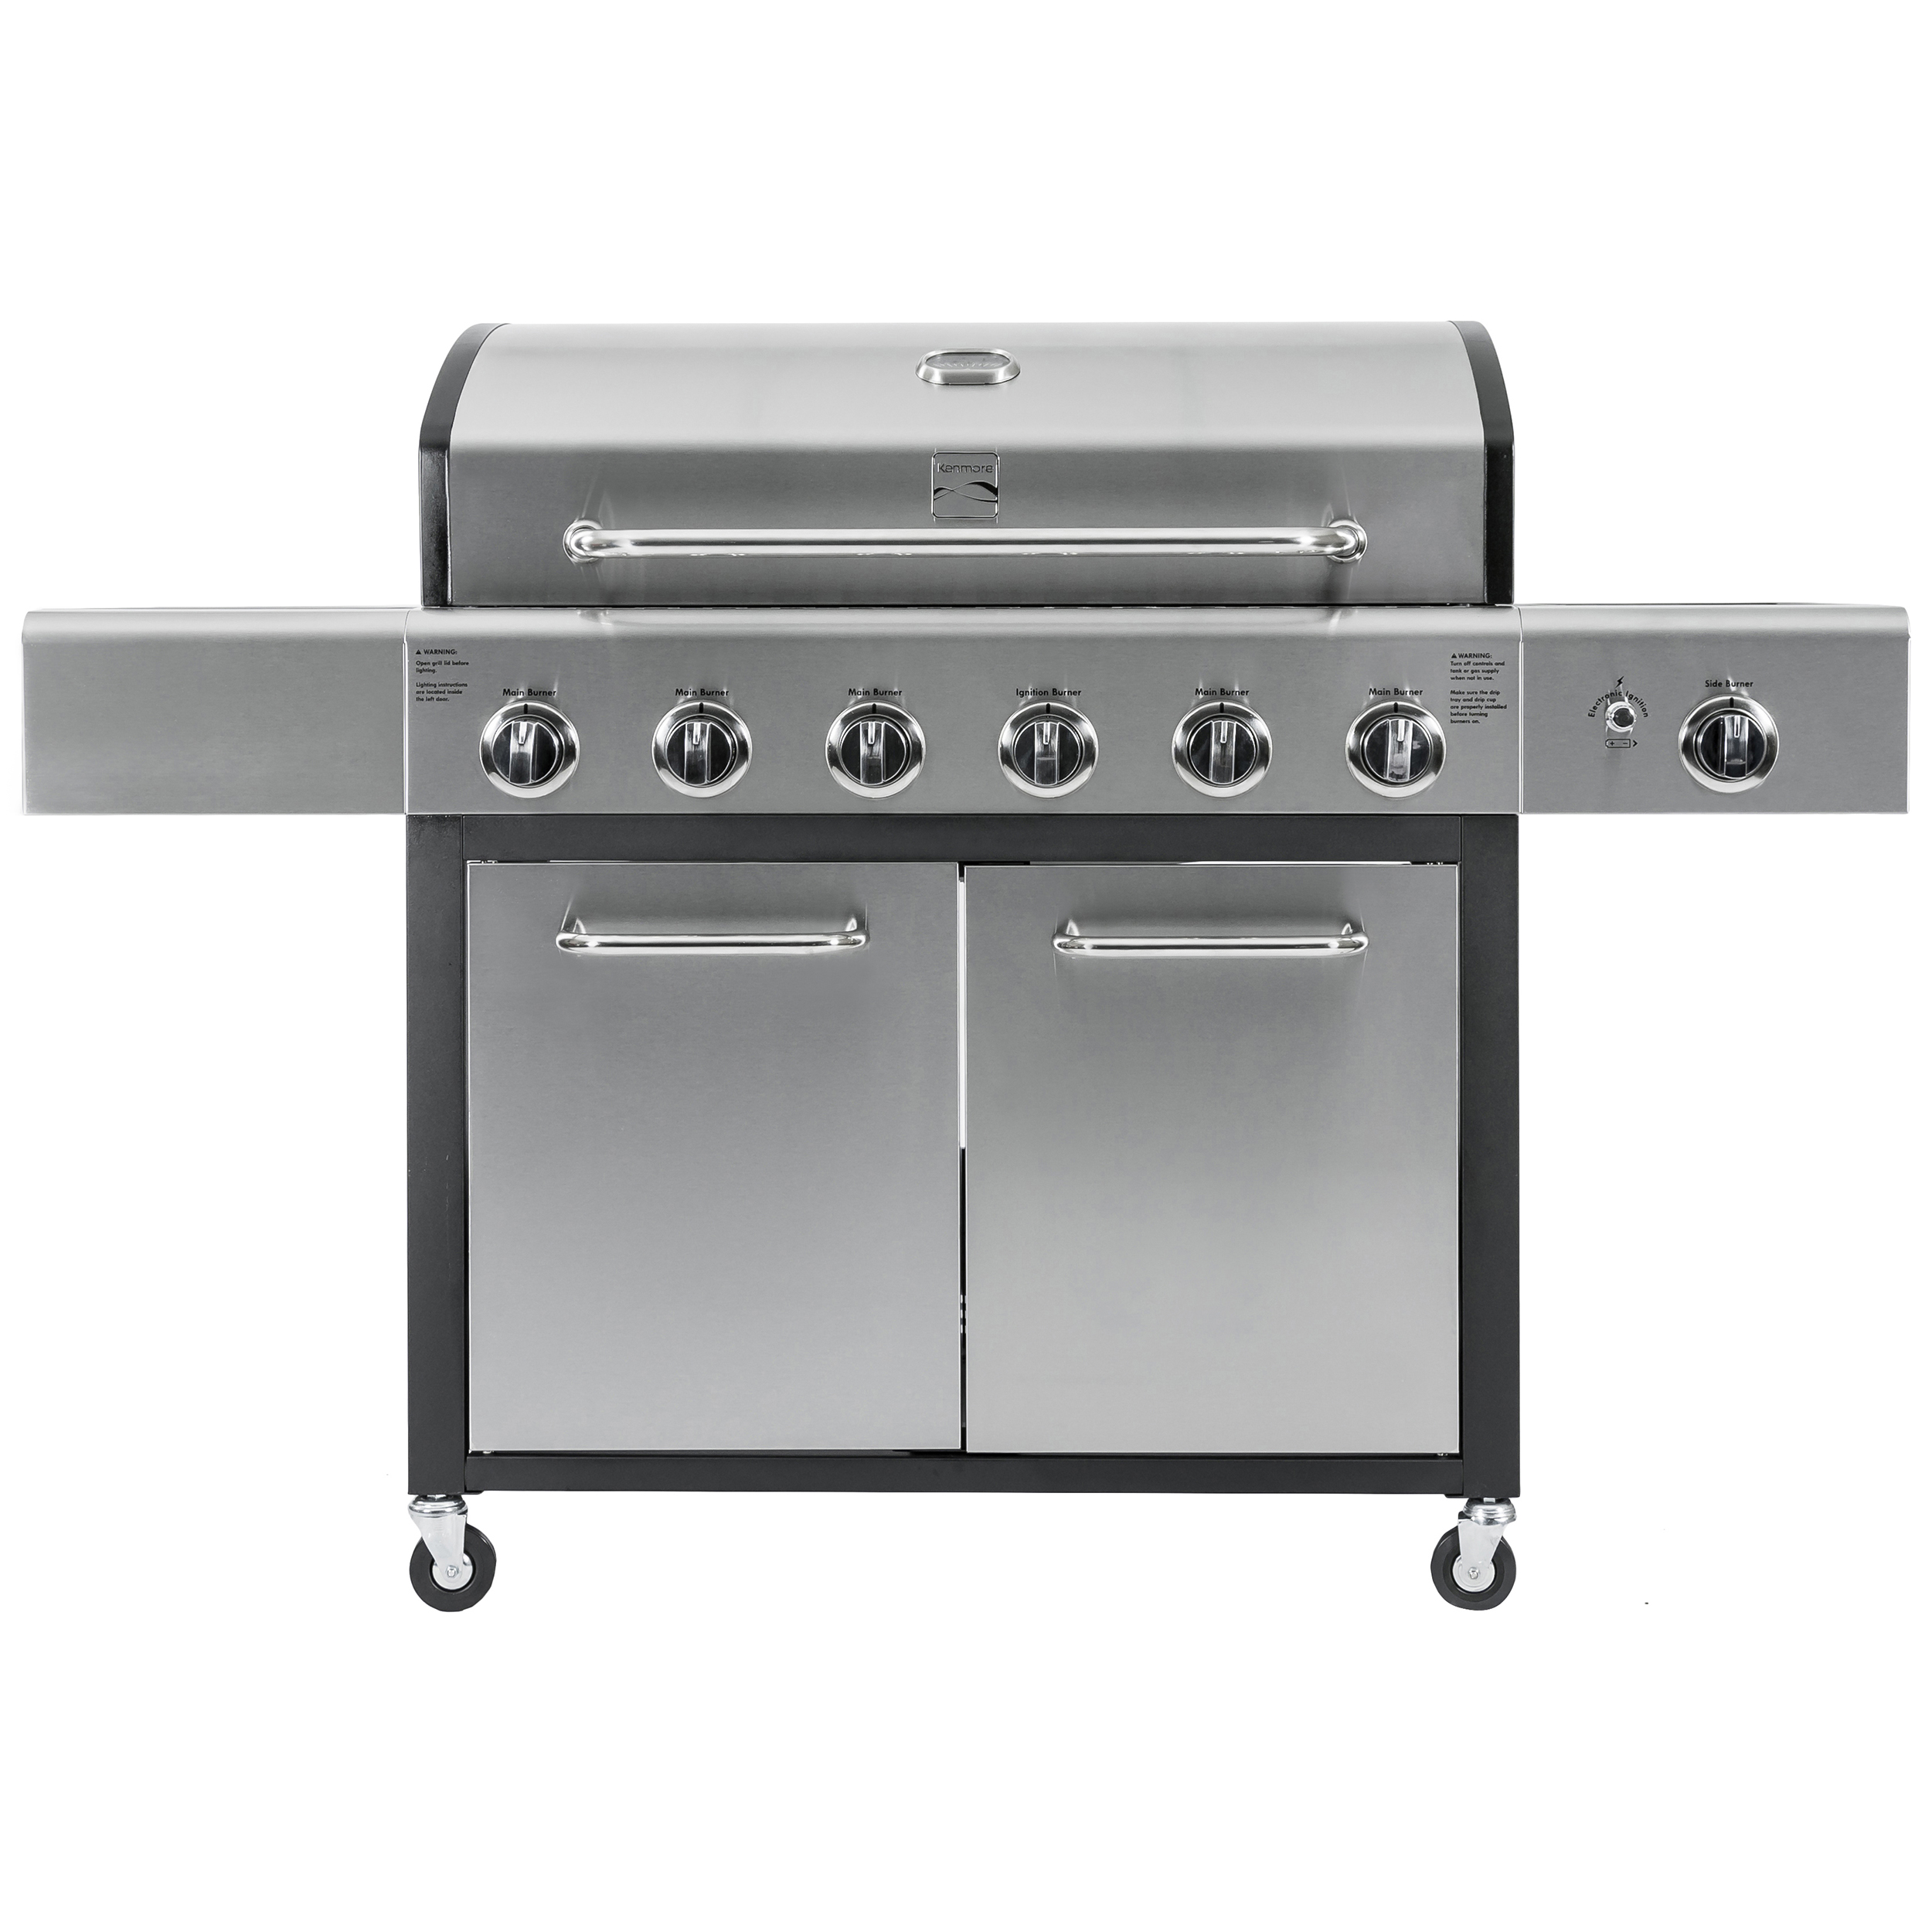 Kenmore 6-Burner Propane Gas Grill with Side Burner, PG-40611S0L, Stainless Steel with Black Trim - image 1 of 10